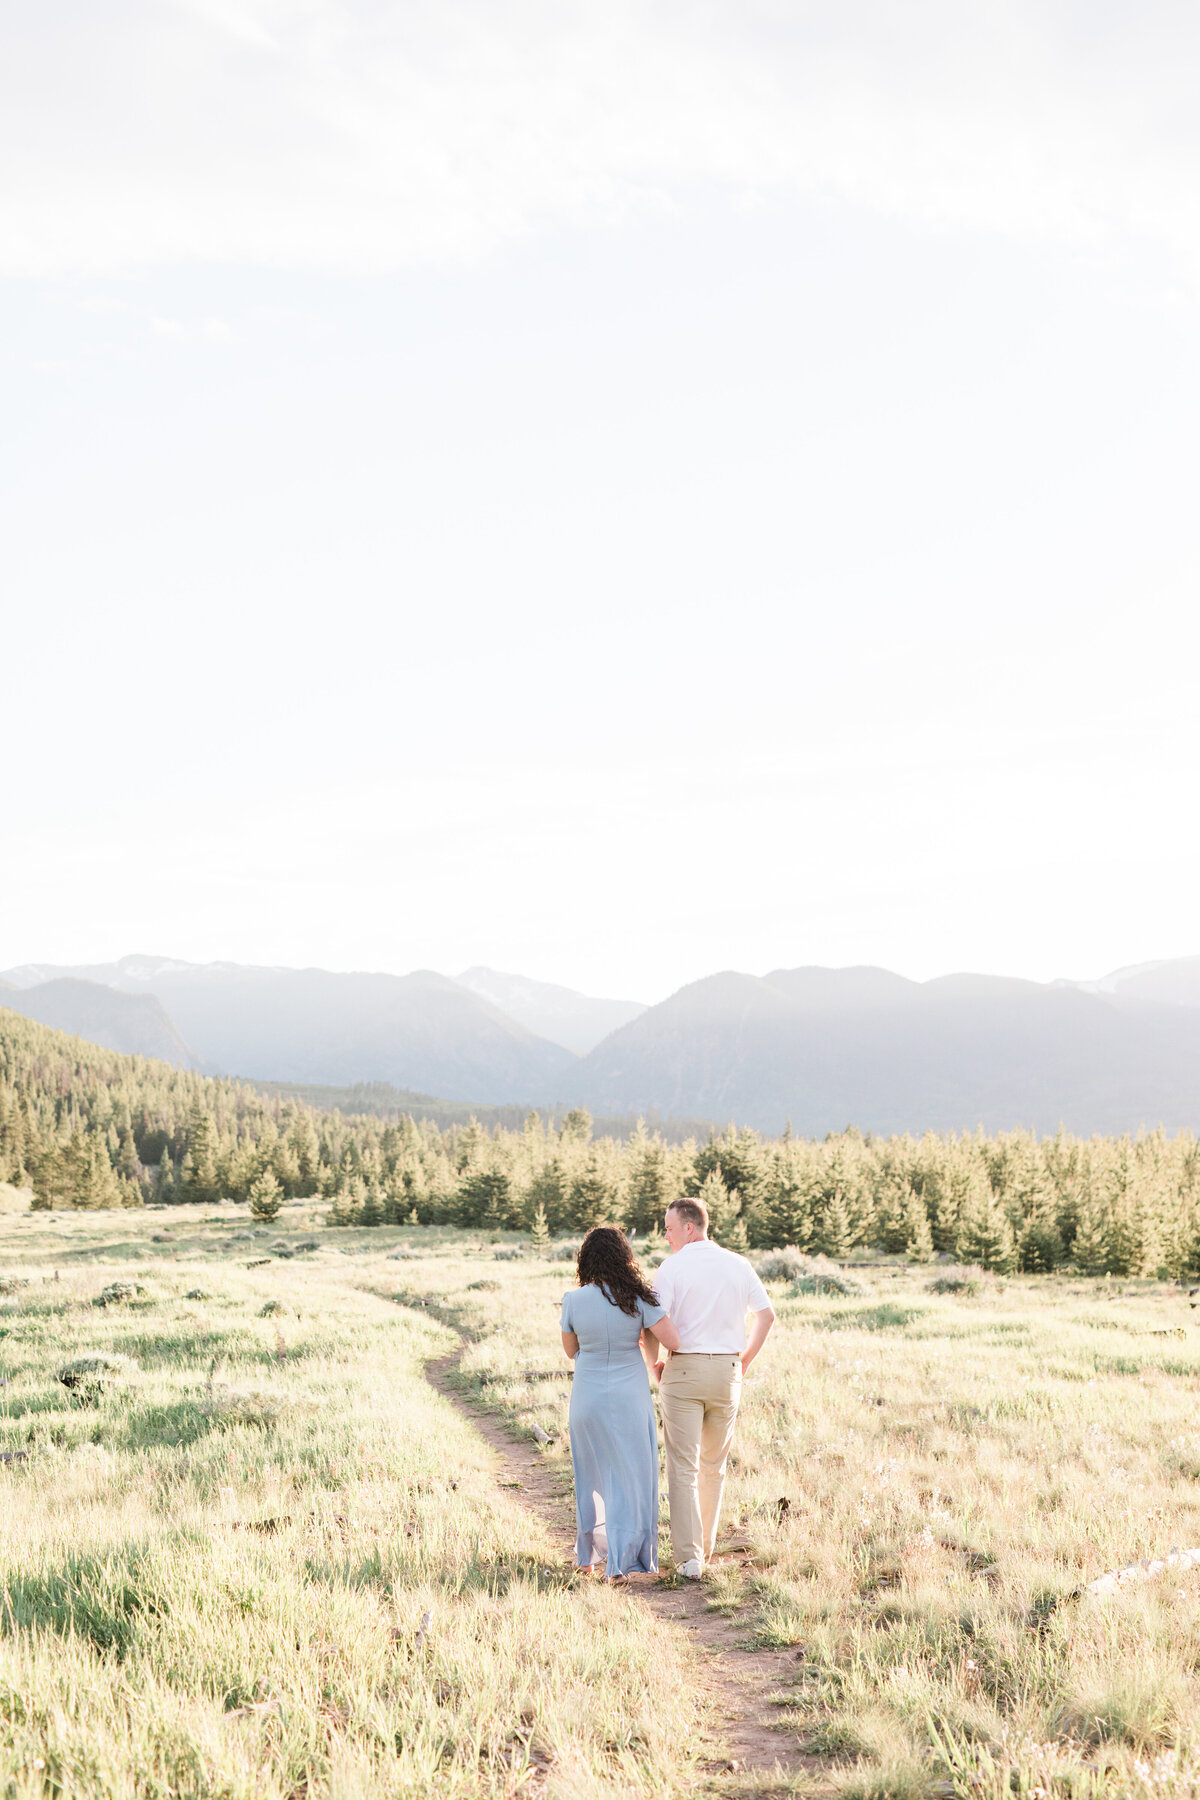 A couple is walking towards the sunset in a mountain field during the summer months